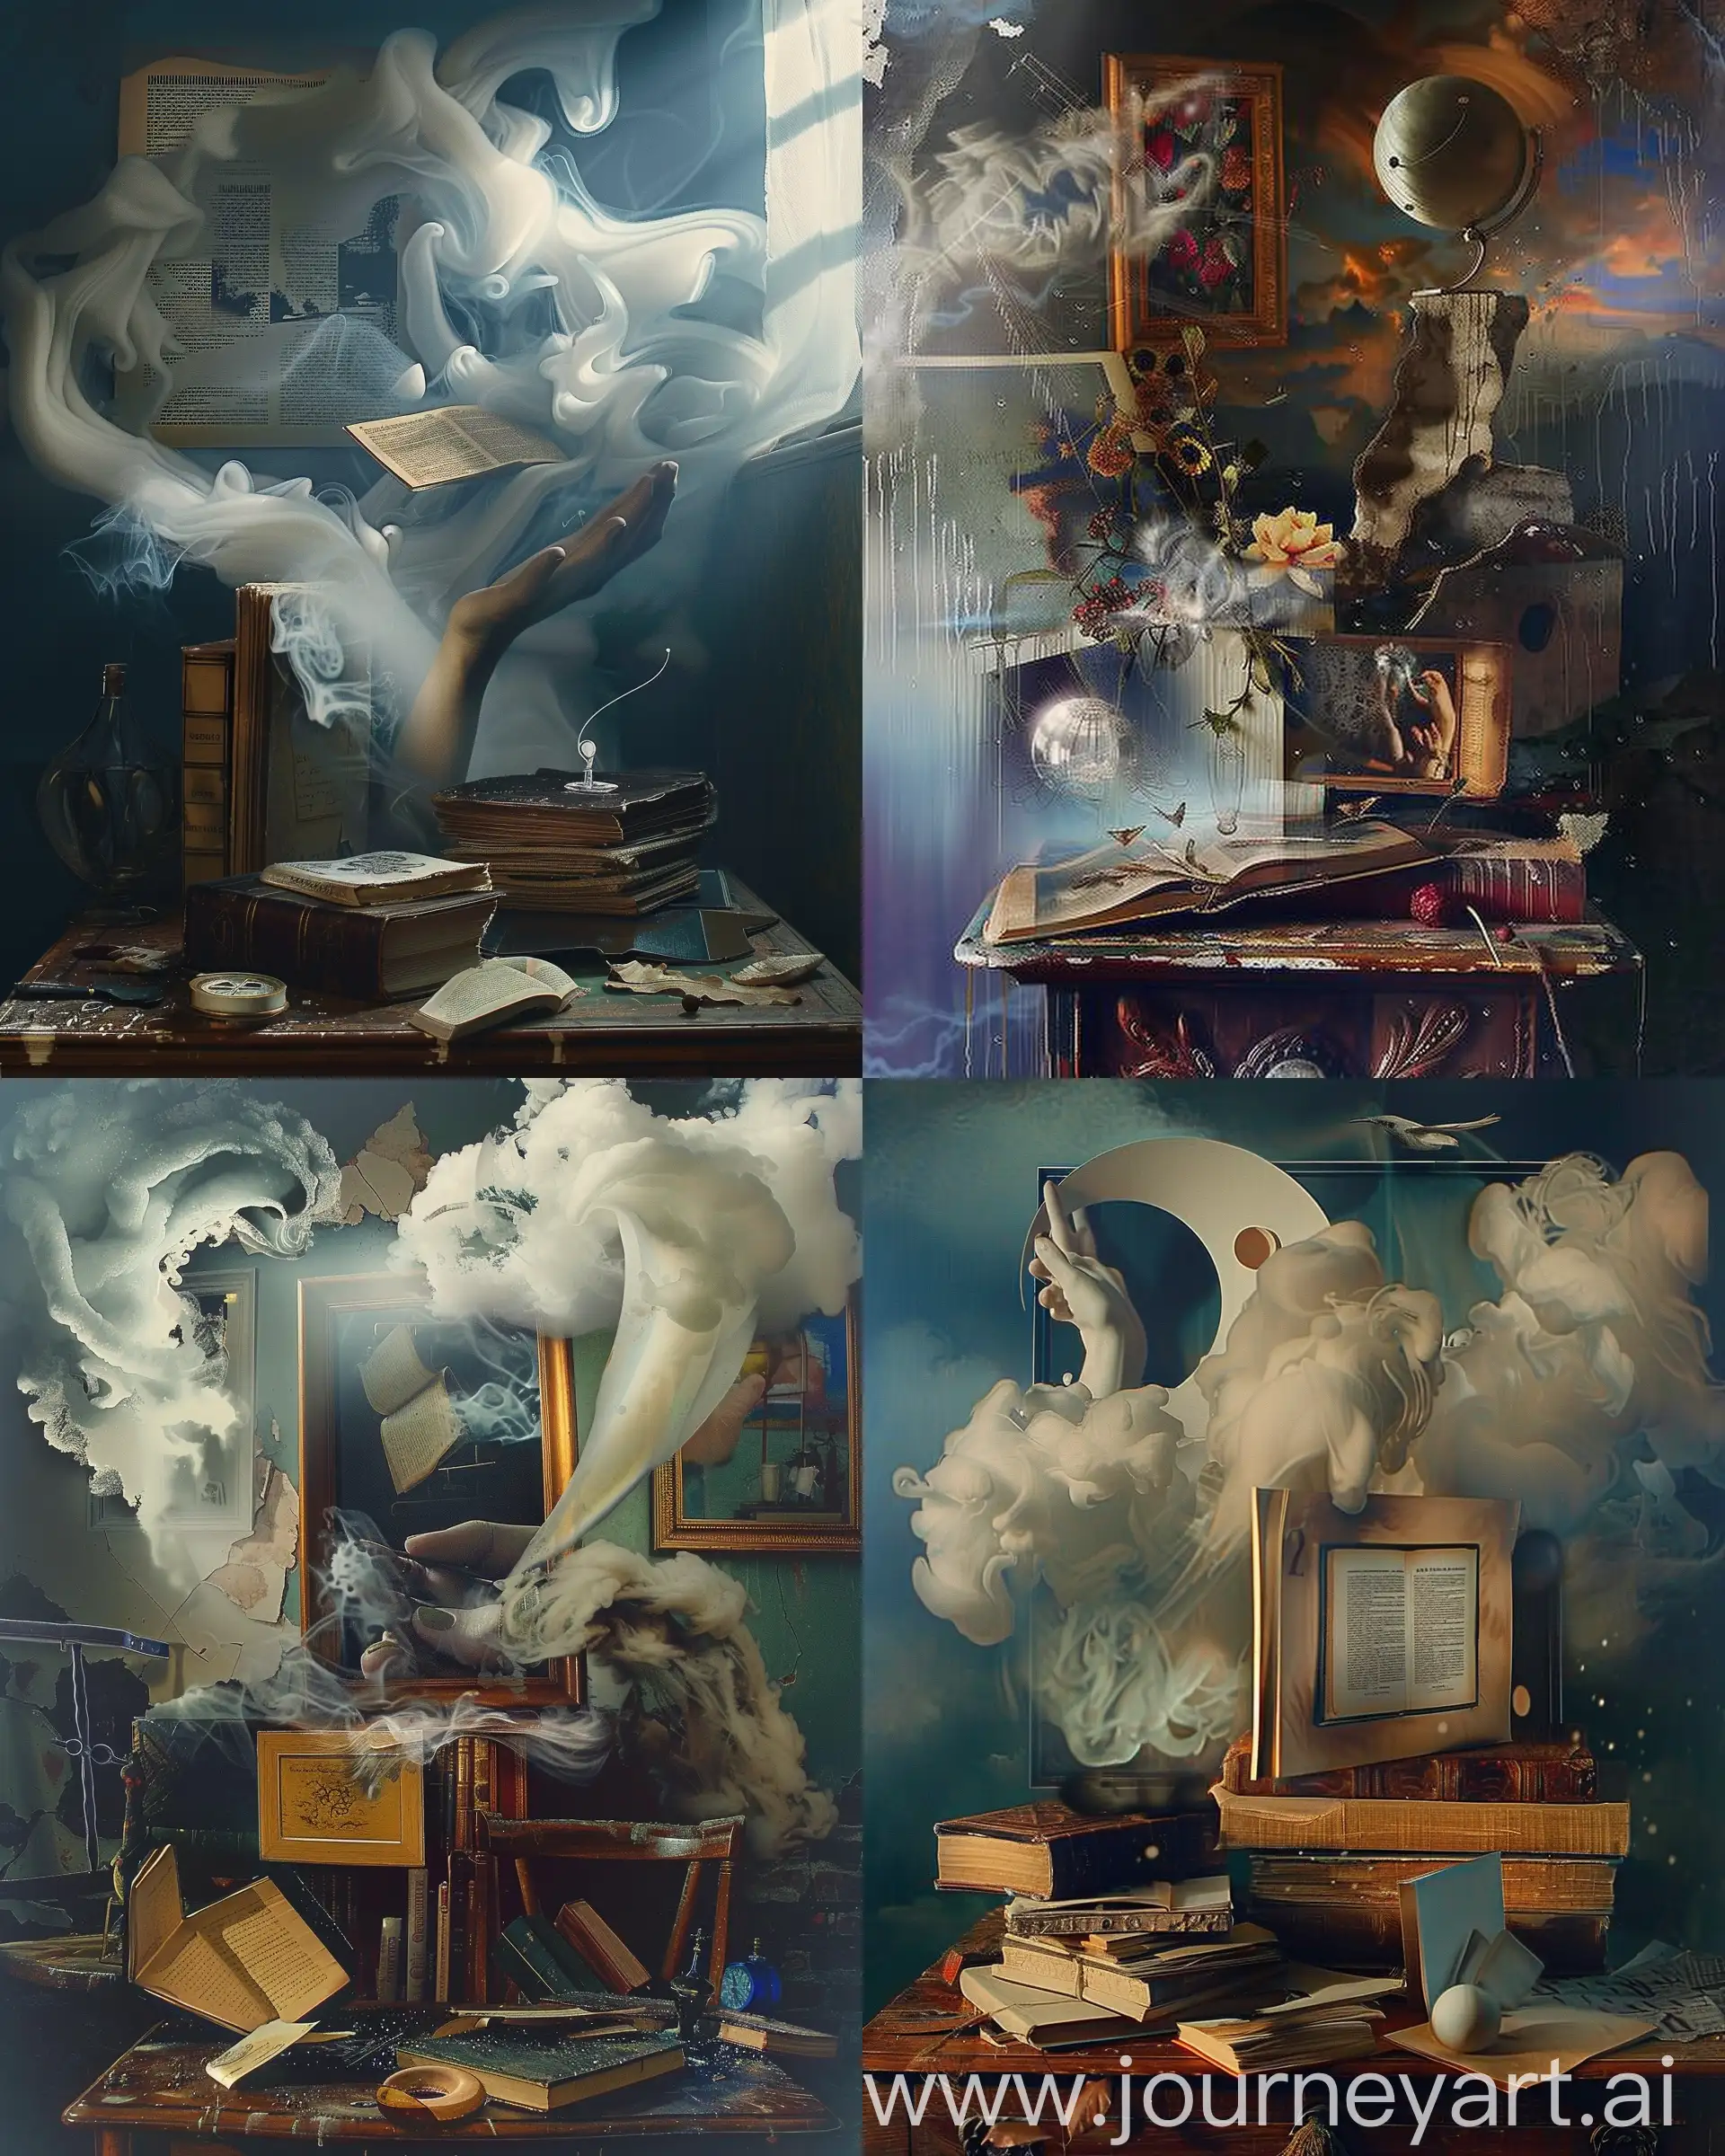 https://i.postimg.cc/Z59shwqL/0b808710ca215c77b61a6dddccd8bd35.jpg, staged photography in style of jeffrey g batchelor paintings, abstract atmosphere, surrealism object, poetical, mysterious atmosphere  --ar 4:5